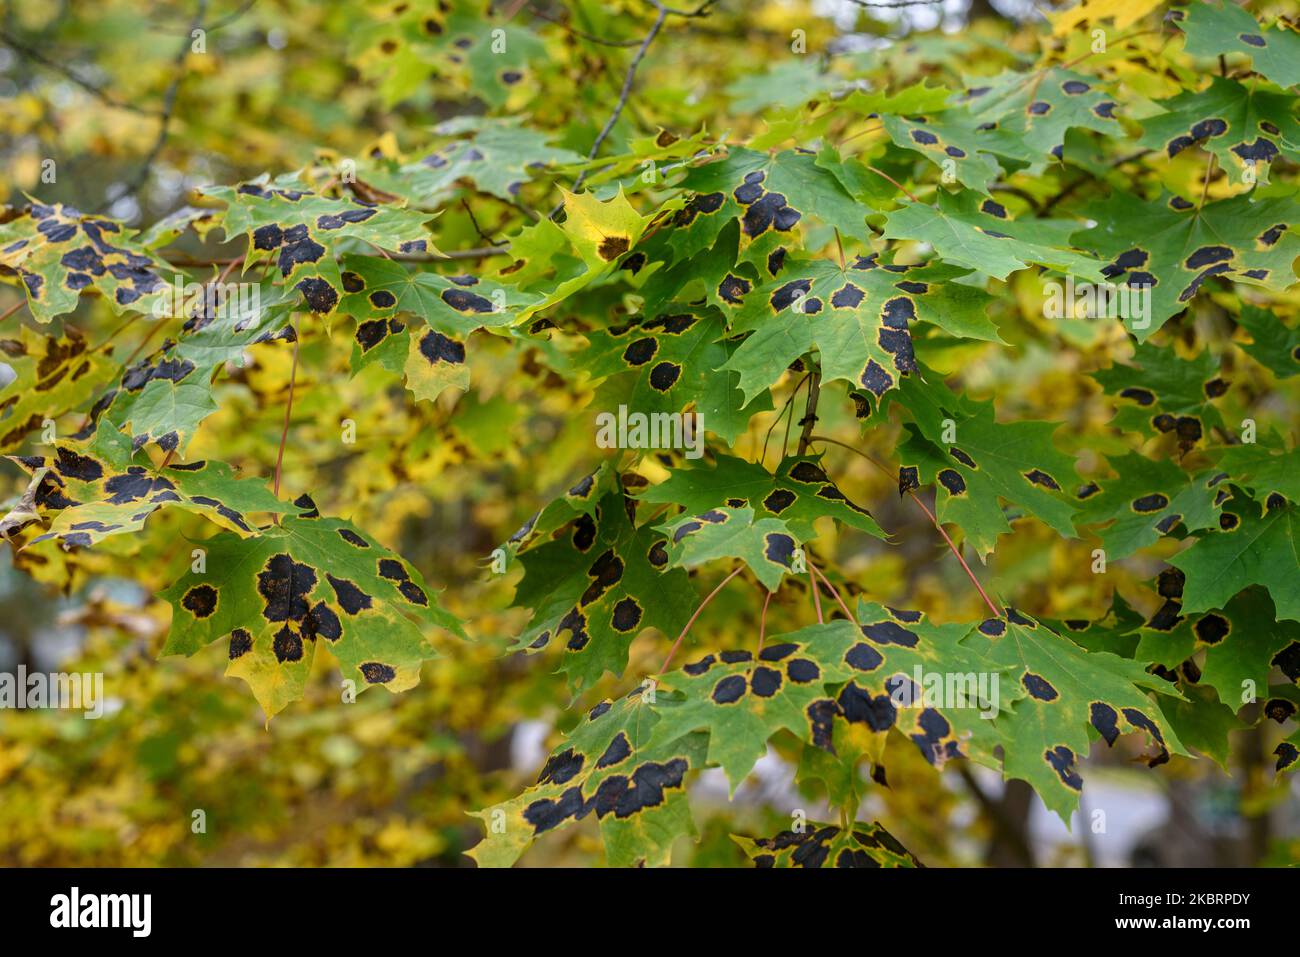 Maple leaves with Rhytisma tar spots in autumn Stock Photo